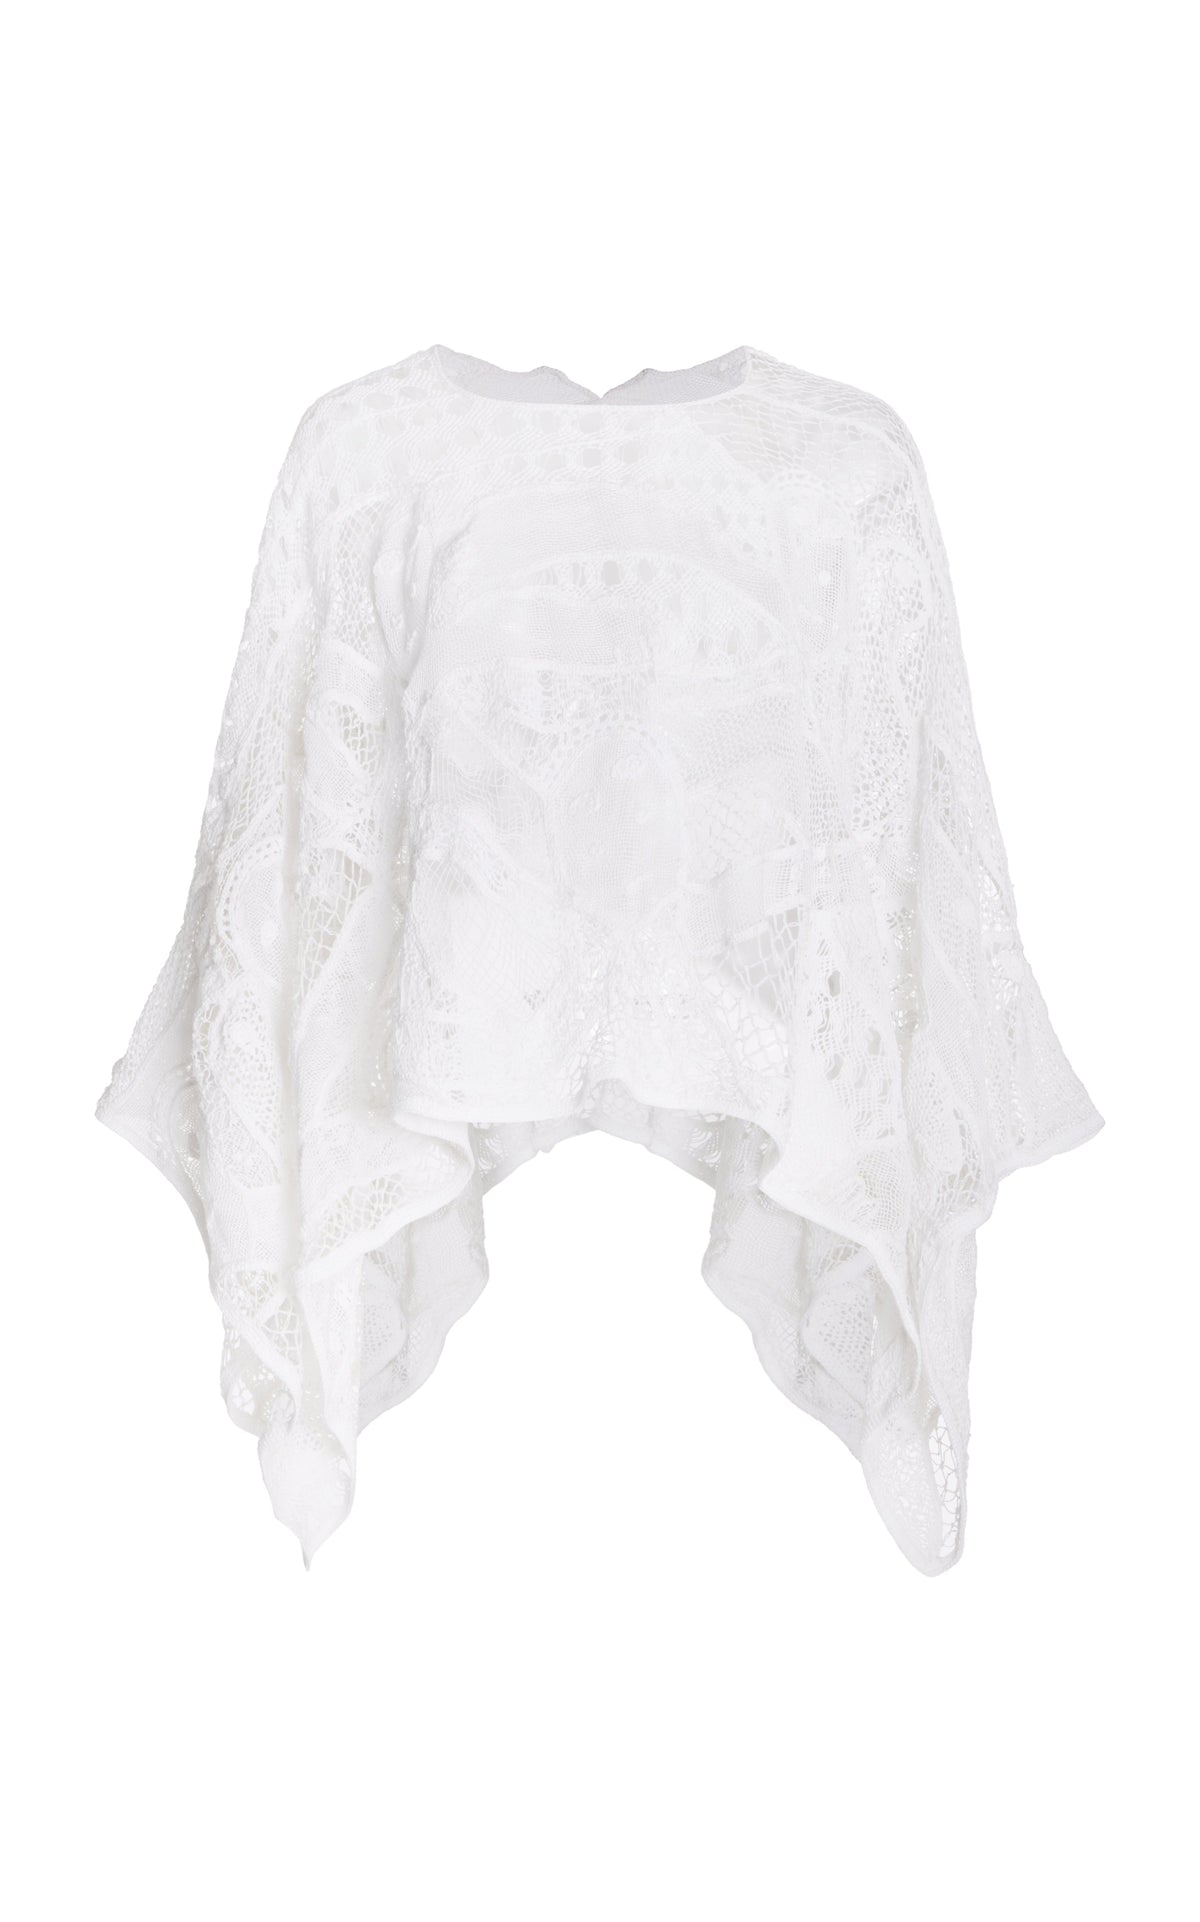 Acrion Knit Poncho in Ivory Cotton Macrame